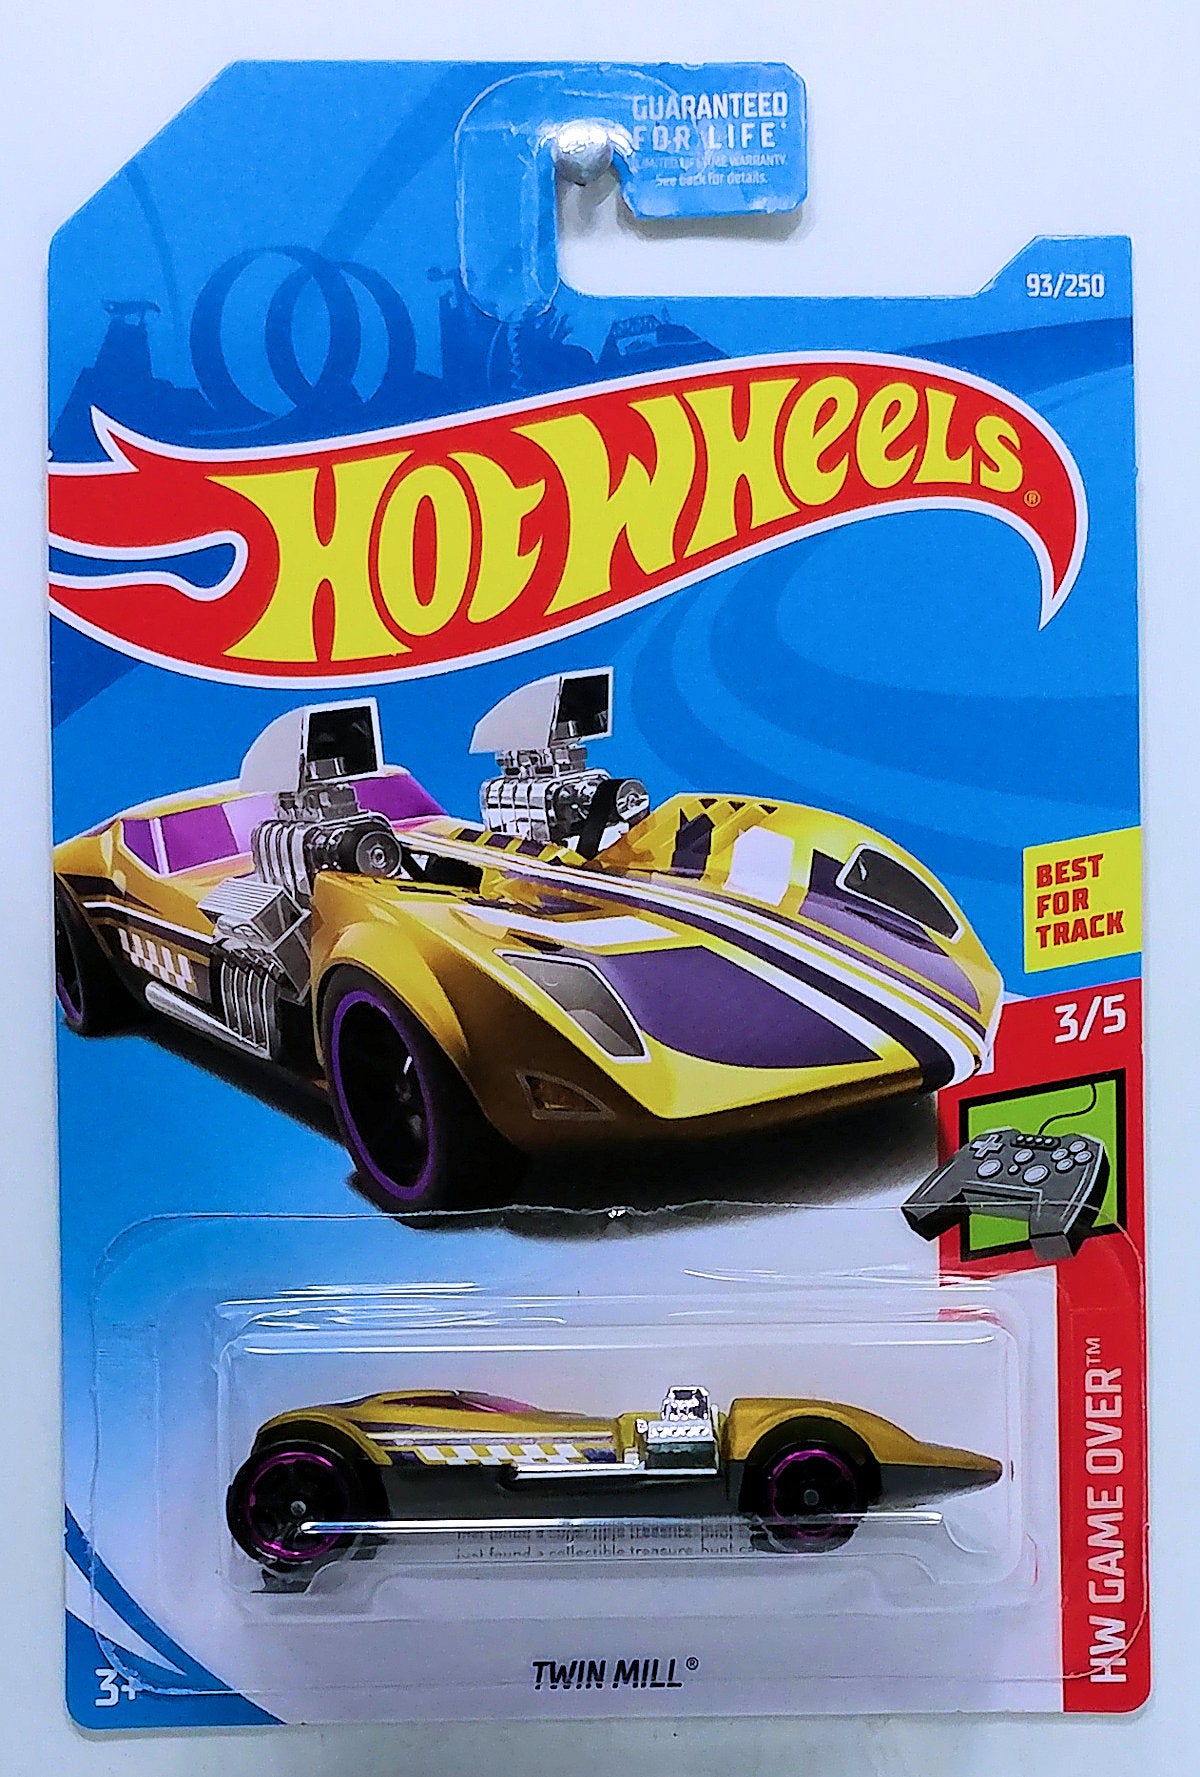 Hot Wheels 2019 - Collector #  093/250 - HW Game Over 3/5 - Treasure Hunts - Twin Mill - Gold